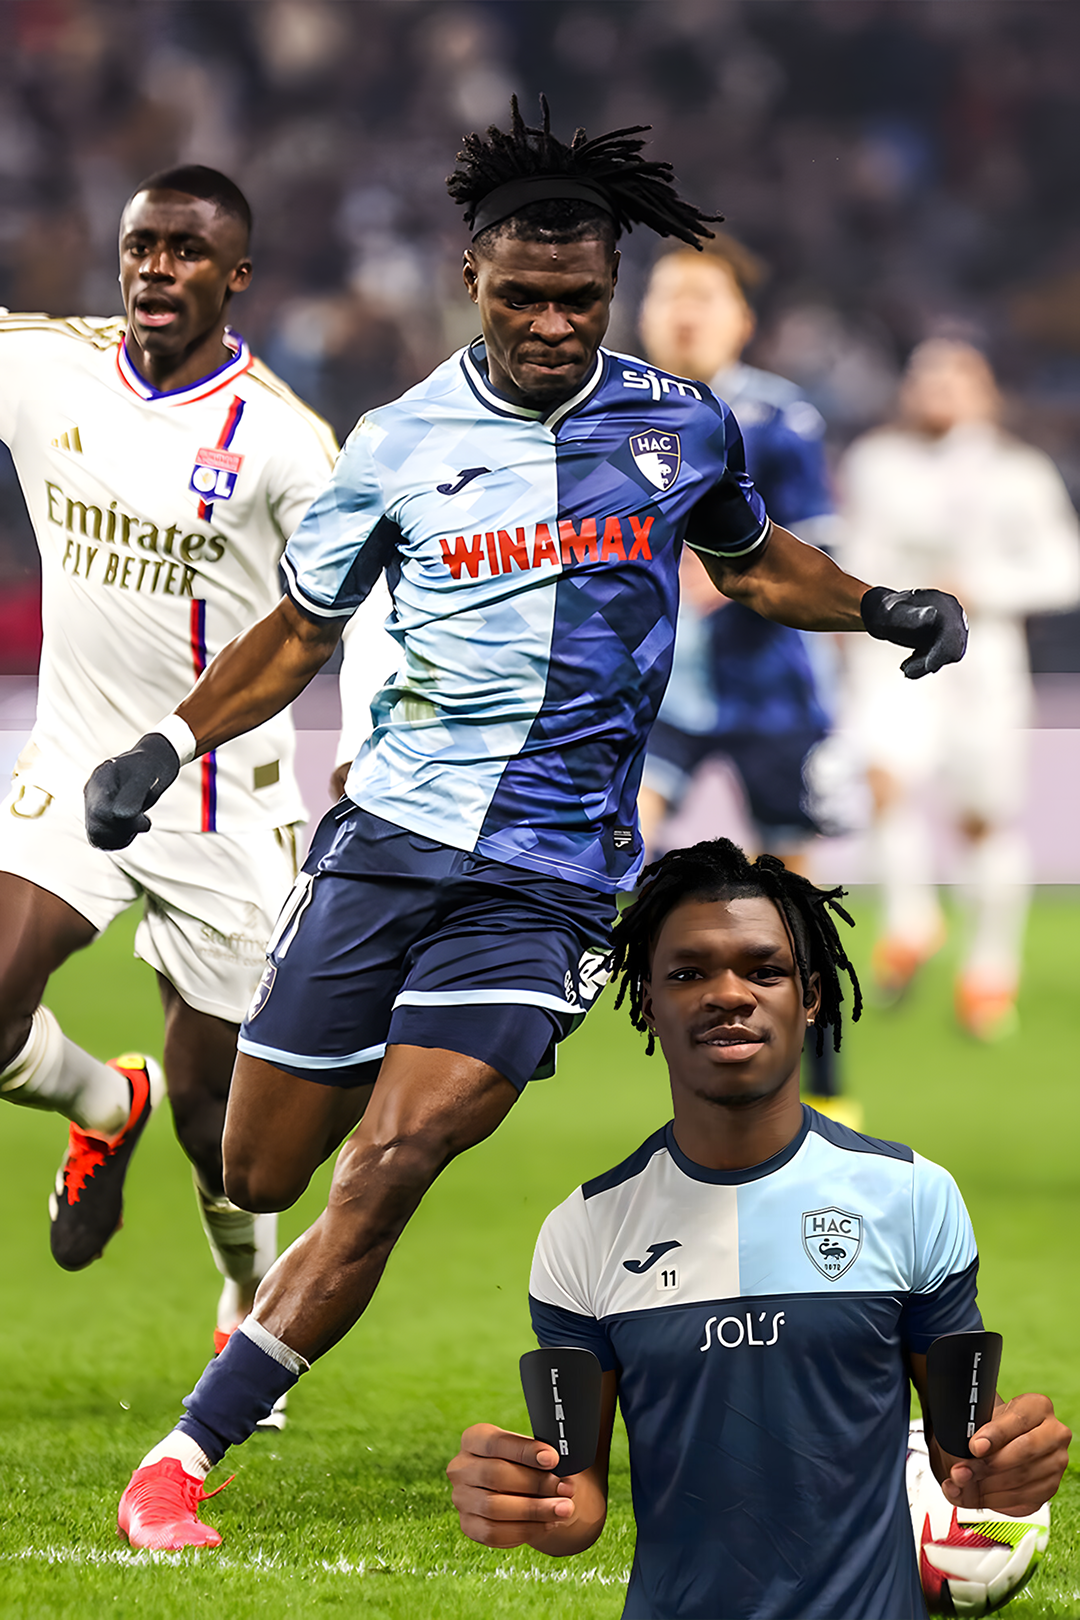 Ligue 1 player wearing FLAIR